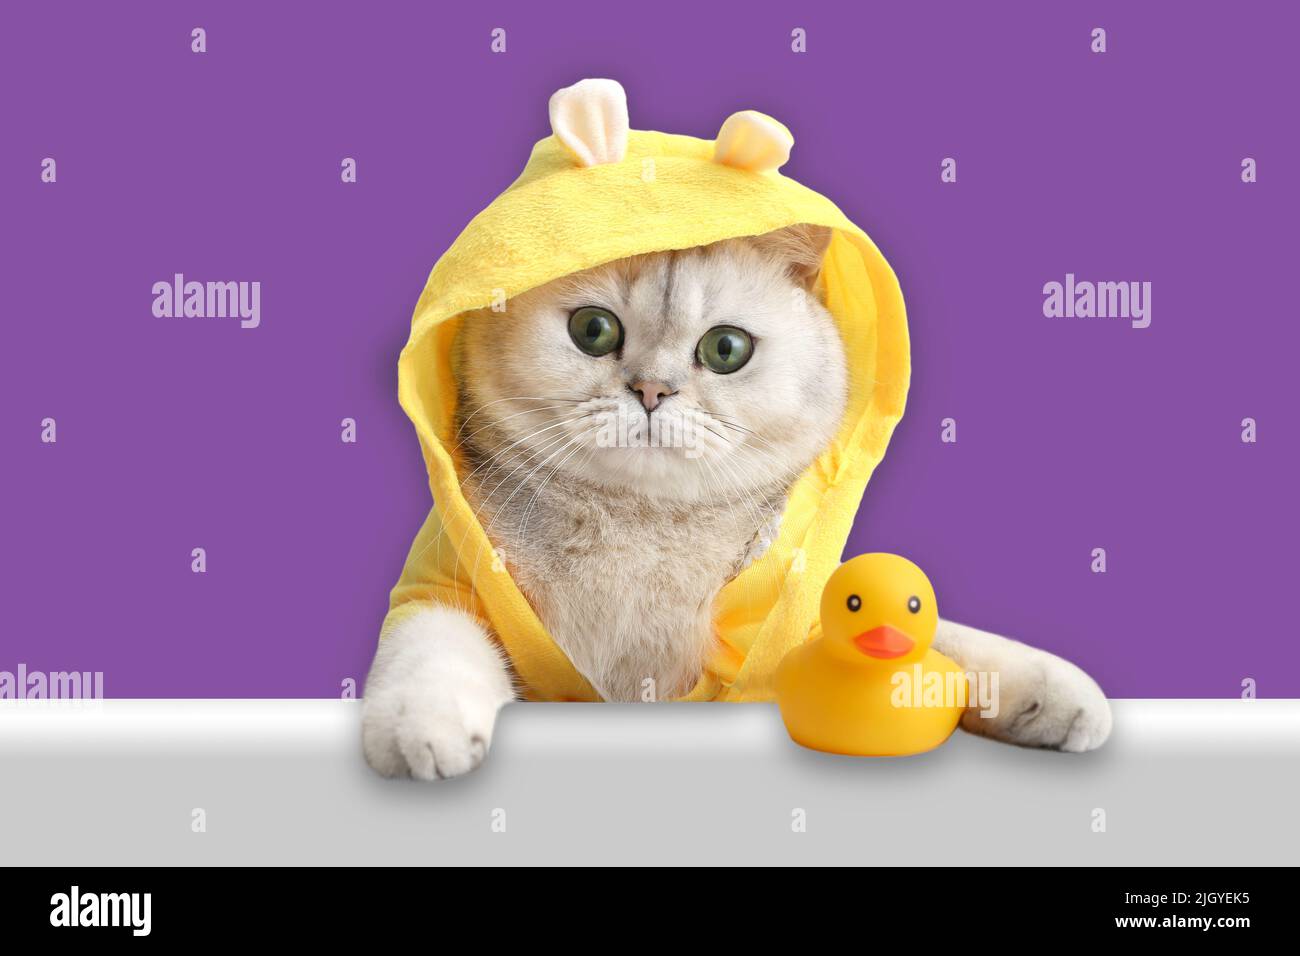 Funny white cat in a yellow coat, looks out of the shell with a yellow rubber duck on a purple background. Stock Photo